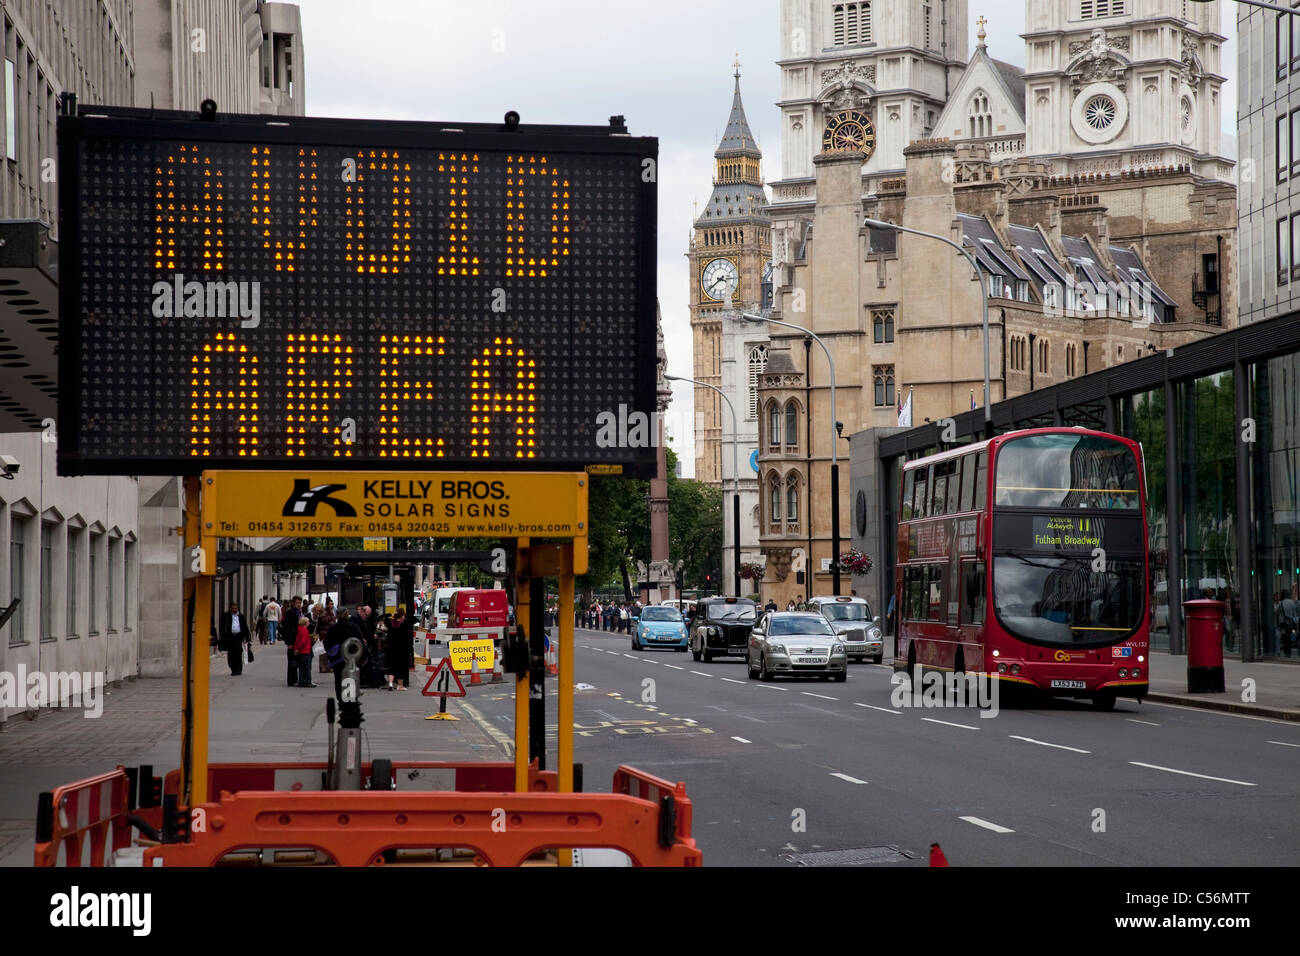 A roadworks sign in Westminster warms motorists to Avoid Area. Ironically with the backdrop of the Houses of Parliament, London. Stock Photo